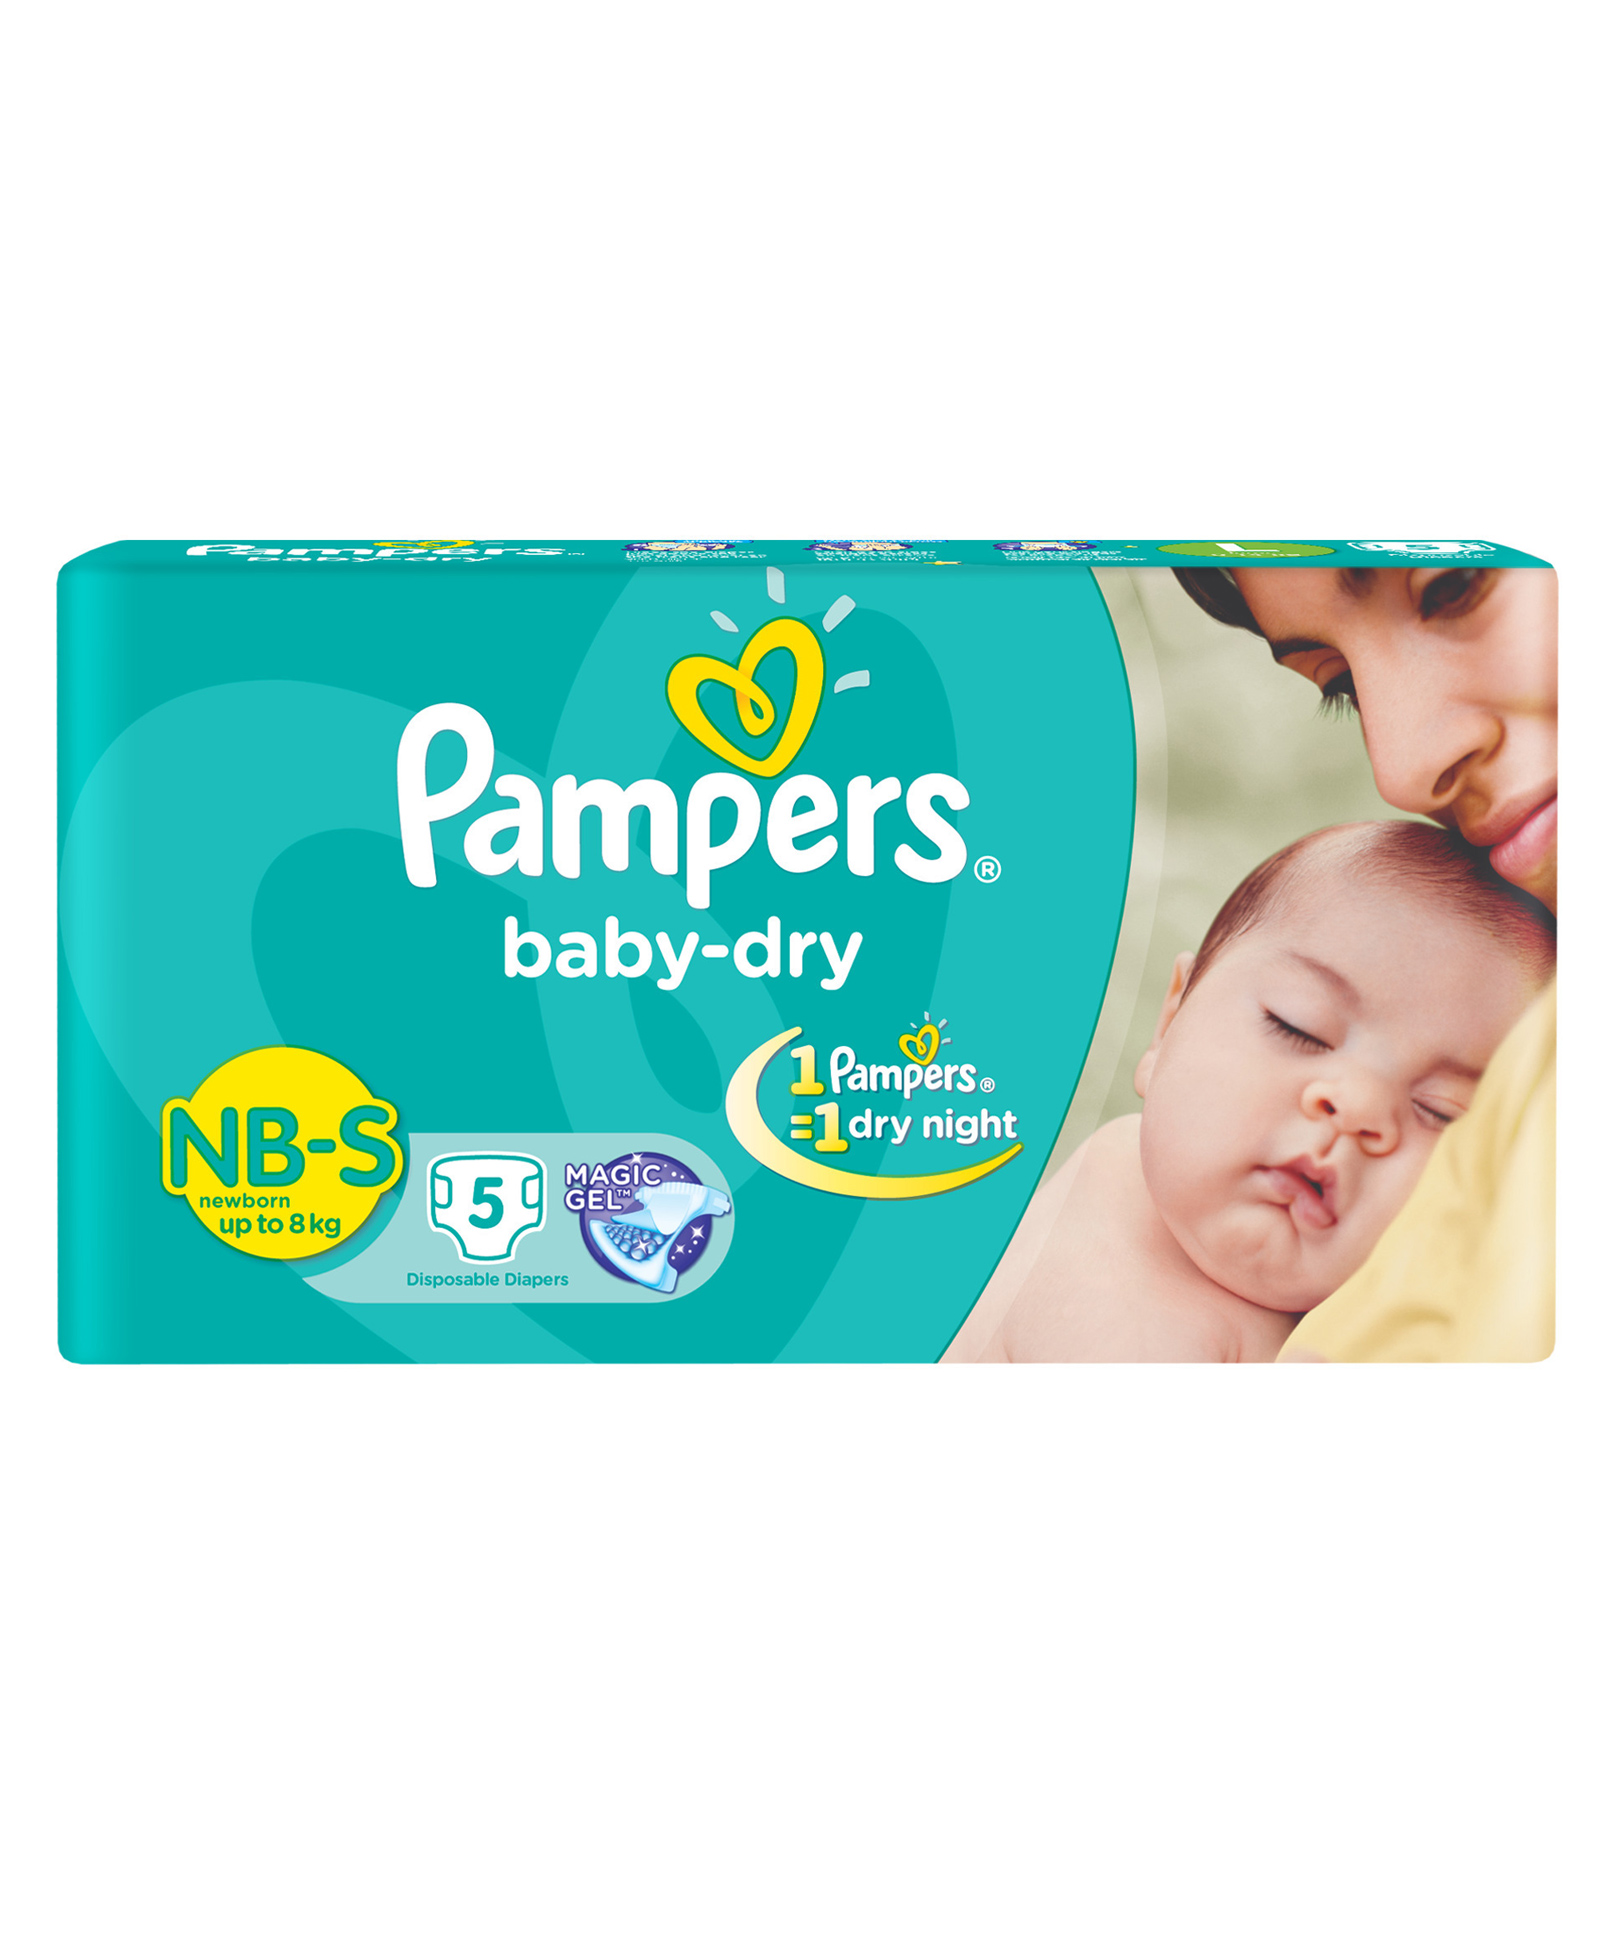 Pampers price